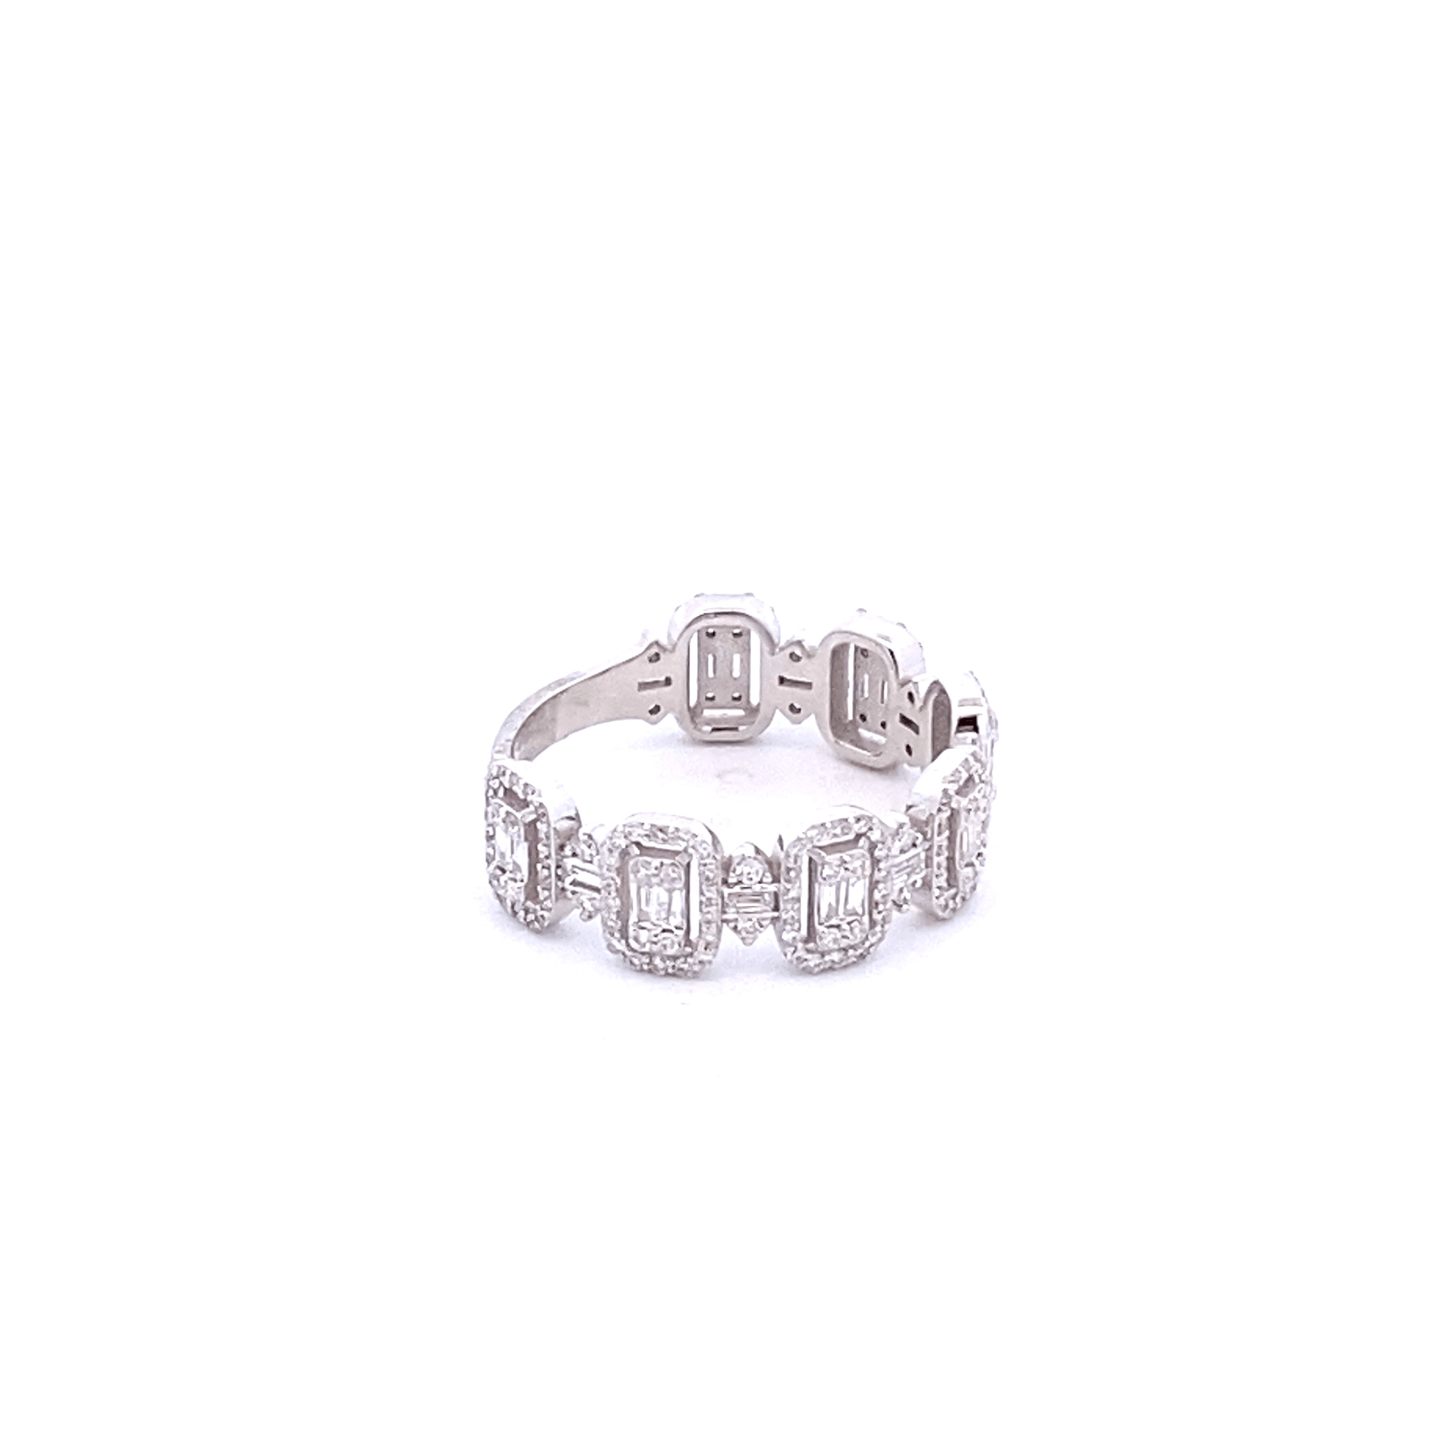 Ring diamond band 7 sections wide - Gaines Jewelers